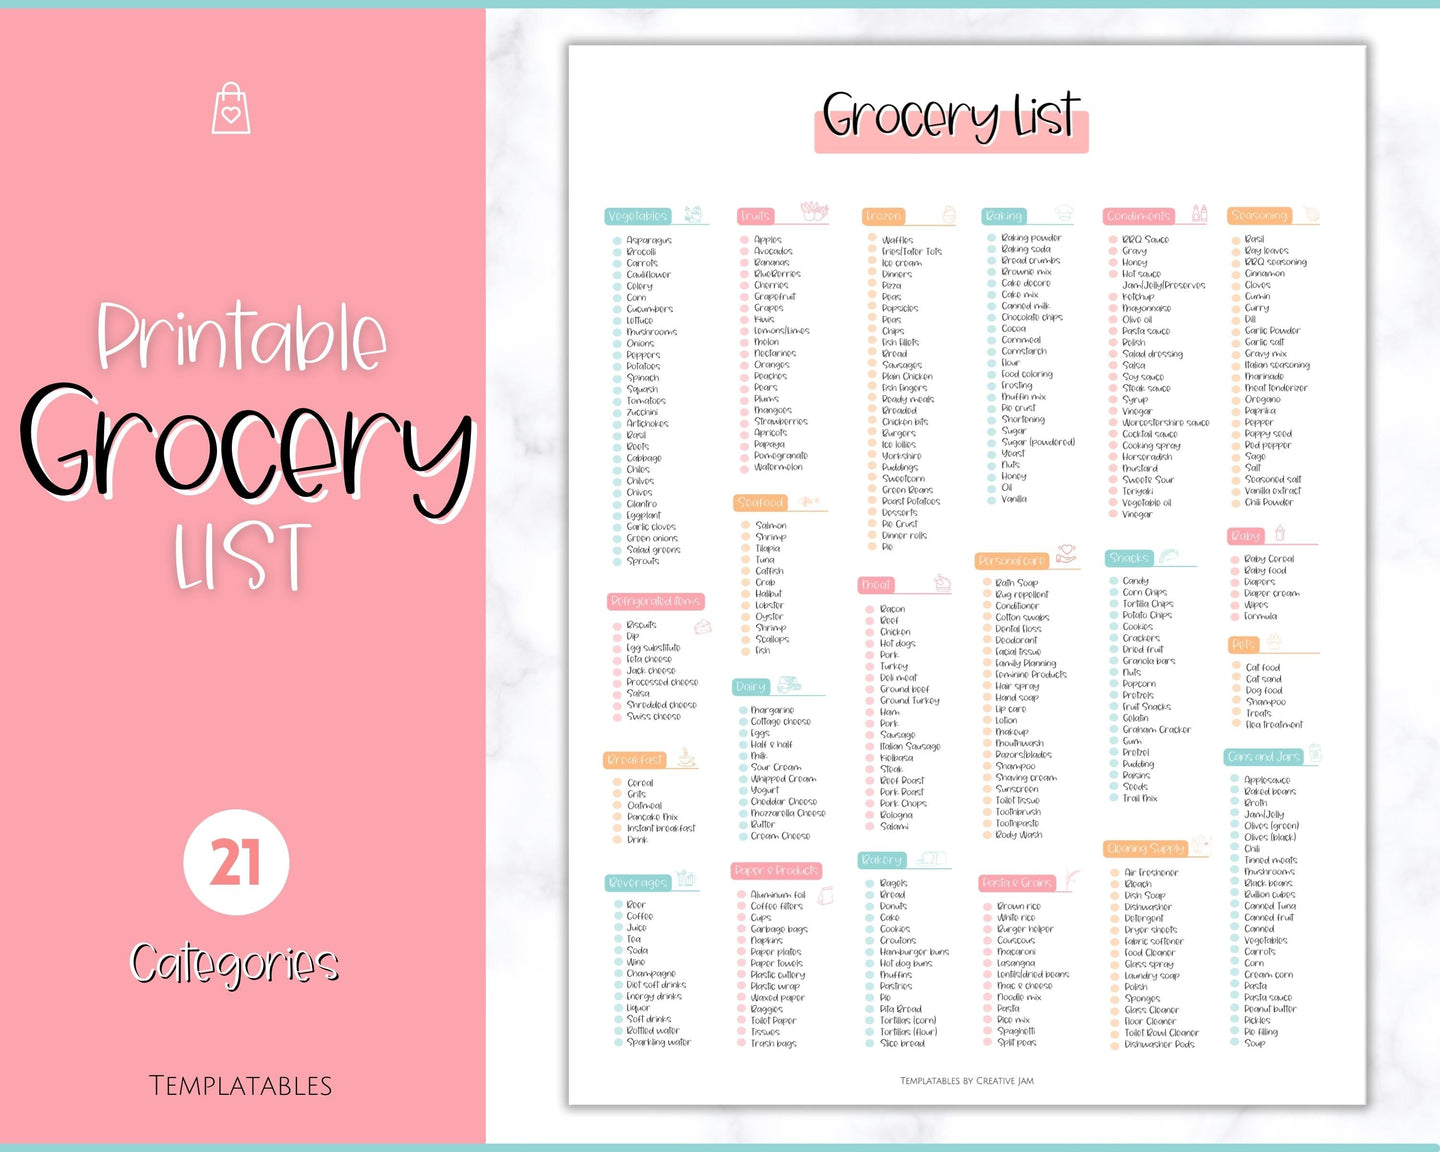 Colorful Grocery List, Master Grocery List Printable, Weekly Shopping List, Meal Planner Checklist, Grocery PDF, Kitchen Organization Template | Colorful Sky